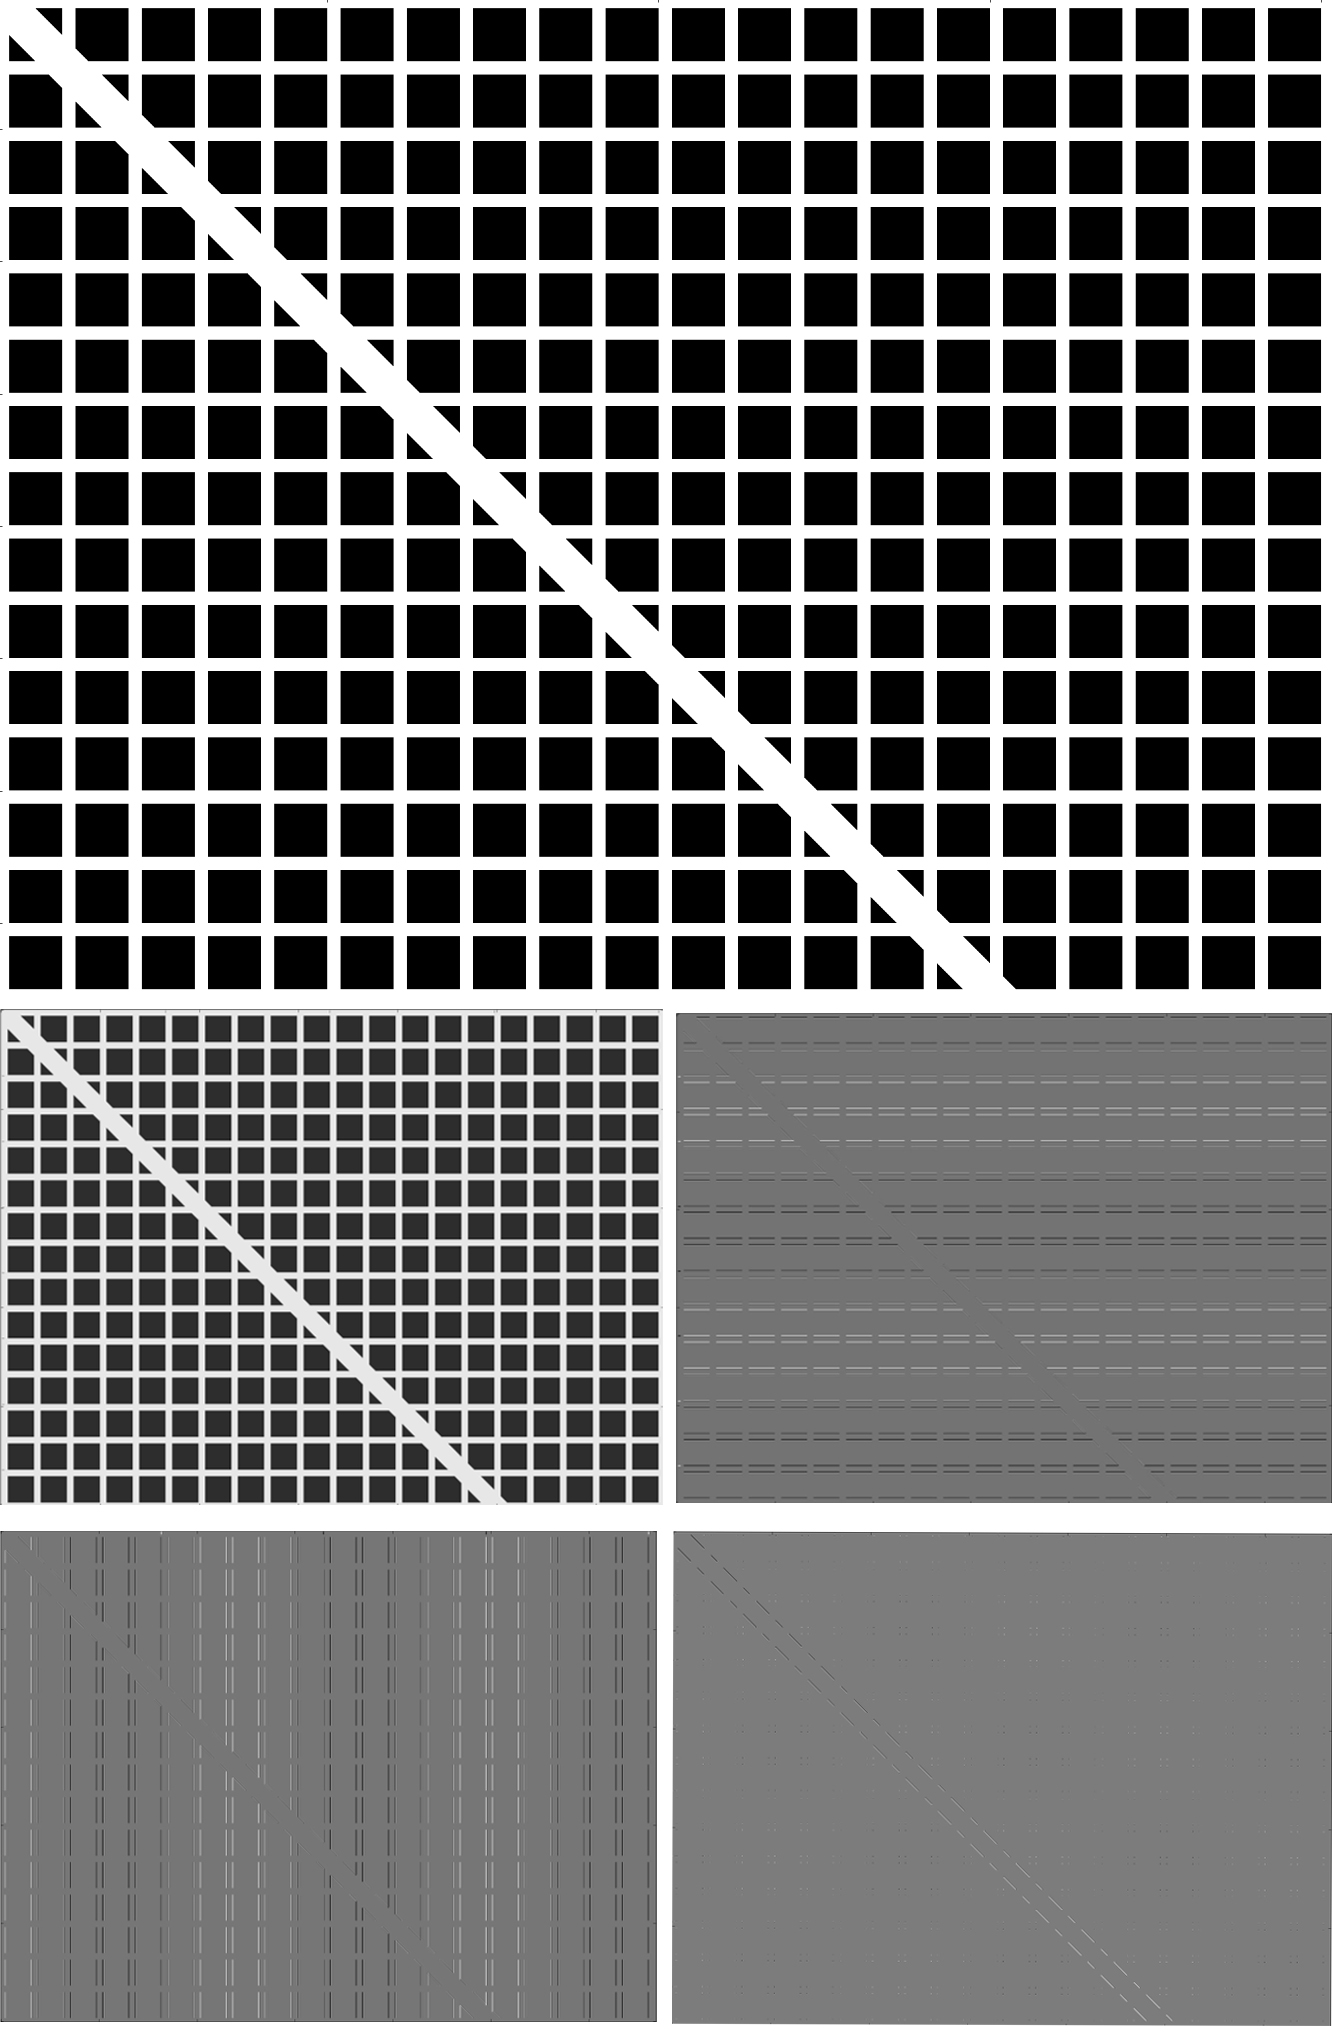 The original image (top, 996×1332 pixels) is transformed using routine c09eaf into the four coefficient (approximation, horizontal, vertical and diagonal) matrices (501×669) displayed below the original. The transformation was performed using the Daubechies wavelet with four vanishing moments and half-point end extension. Note that the approximation coefficients are a very close representation of the original image, while the horizontal, vertical and diagonal features of the image are visible in the respective coefficient matrices.